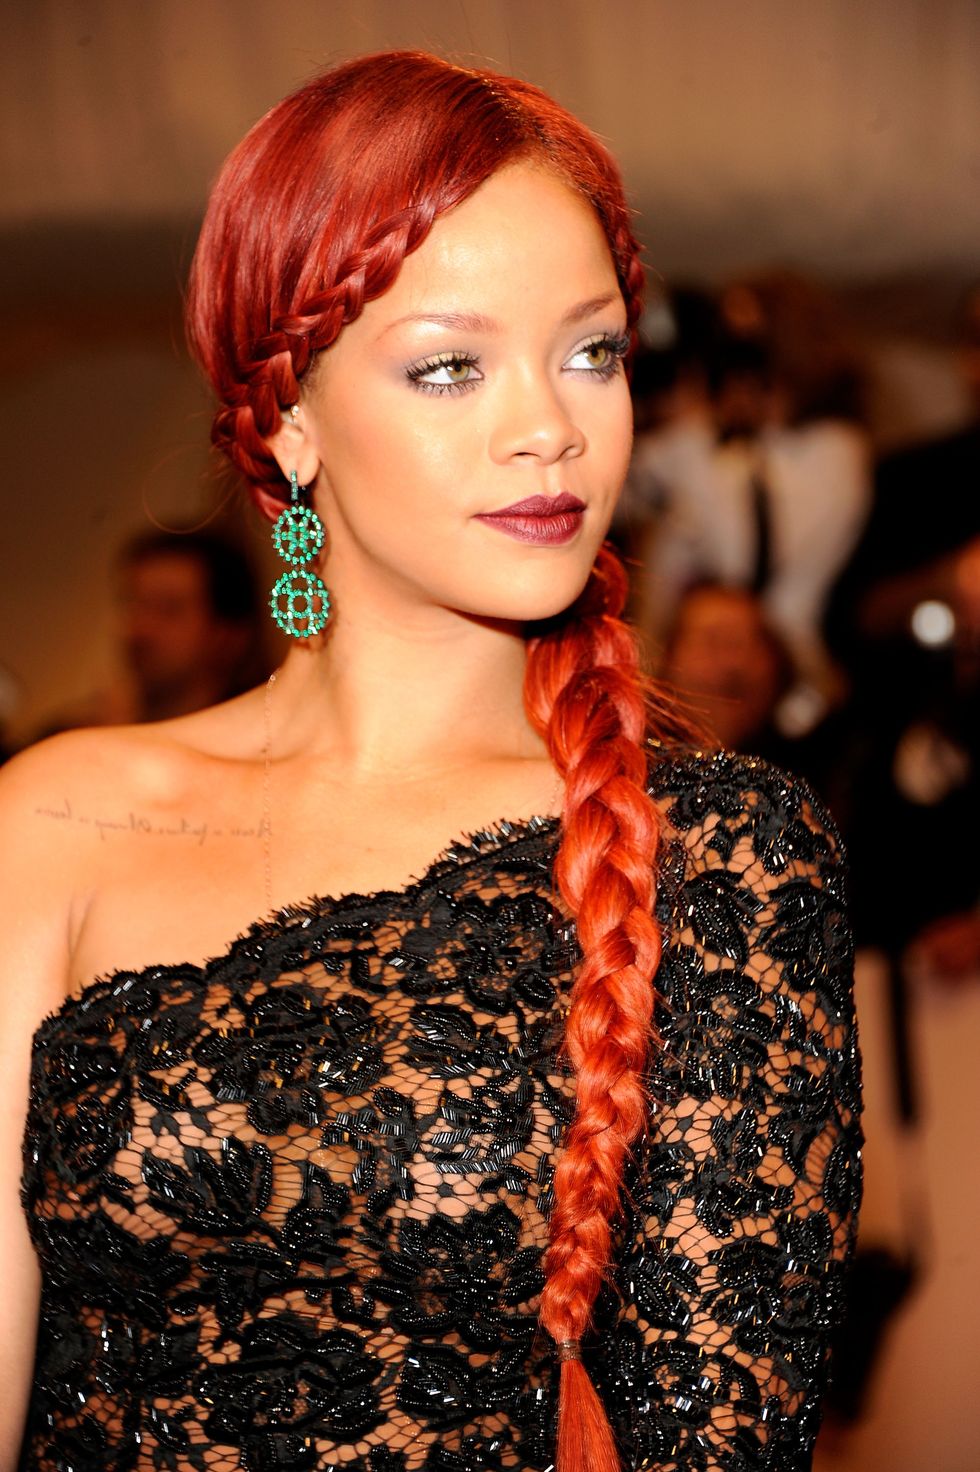 rihanna attends the alexander mcqueen savage beauty costume institute gala at the metropolitan museum of art on may 2, 2011 in new york city